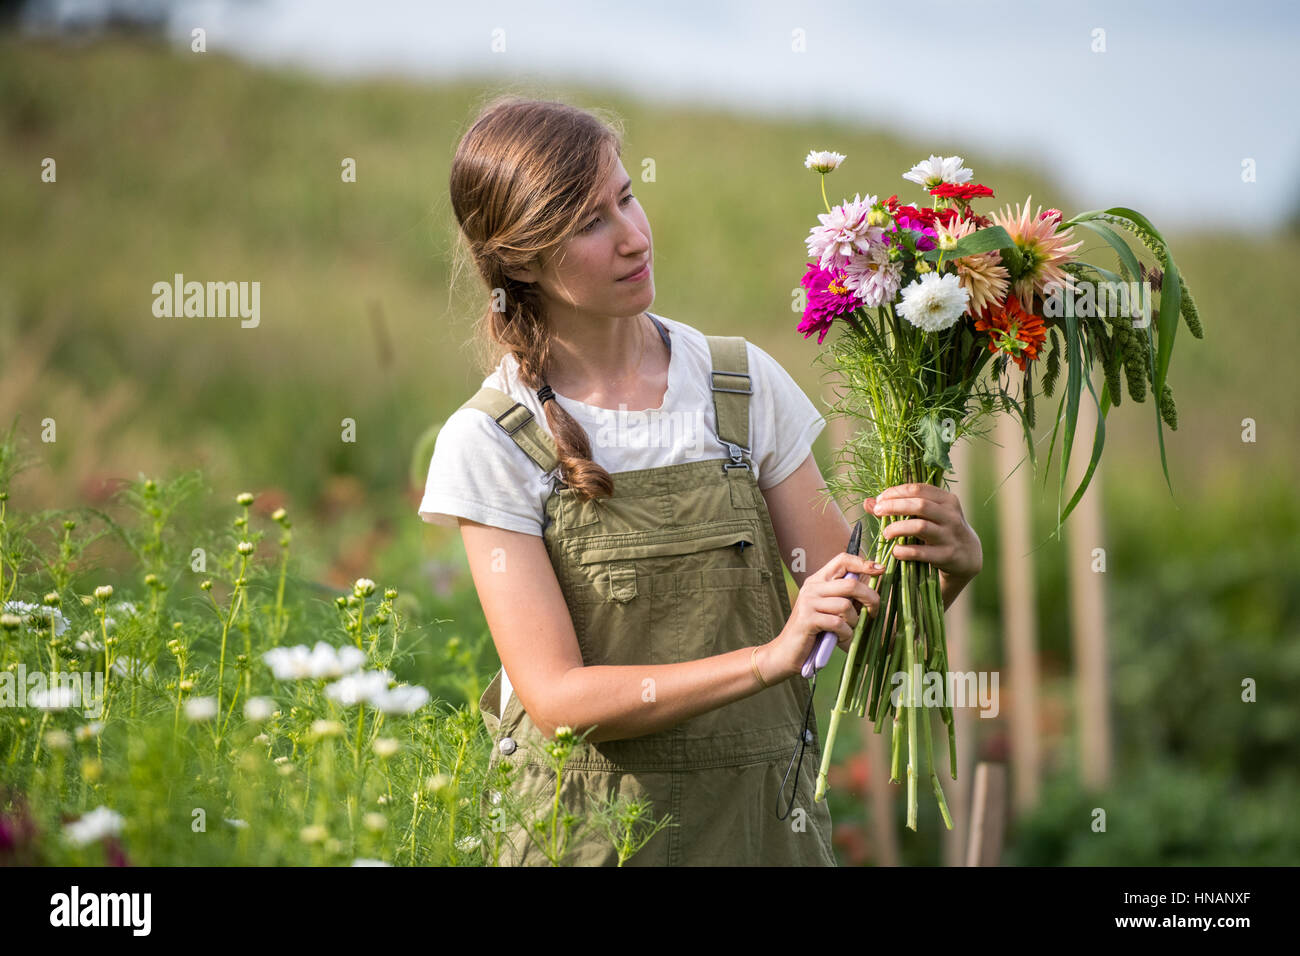 Woman stands in a garden pruning a bouquet of fresh flowers on a farm in rural Maryland. Stock Photo